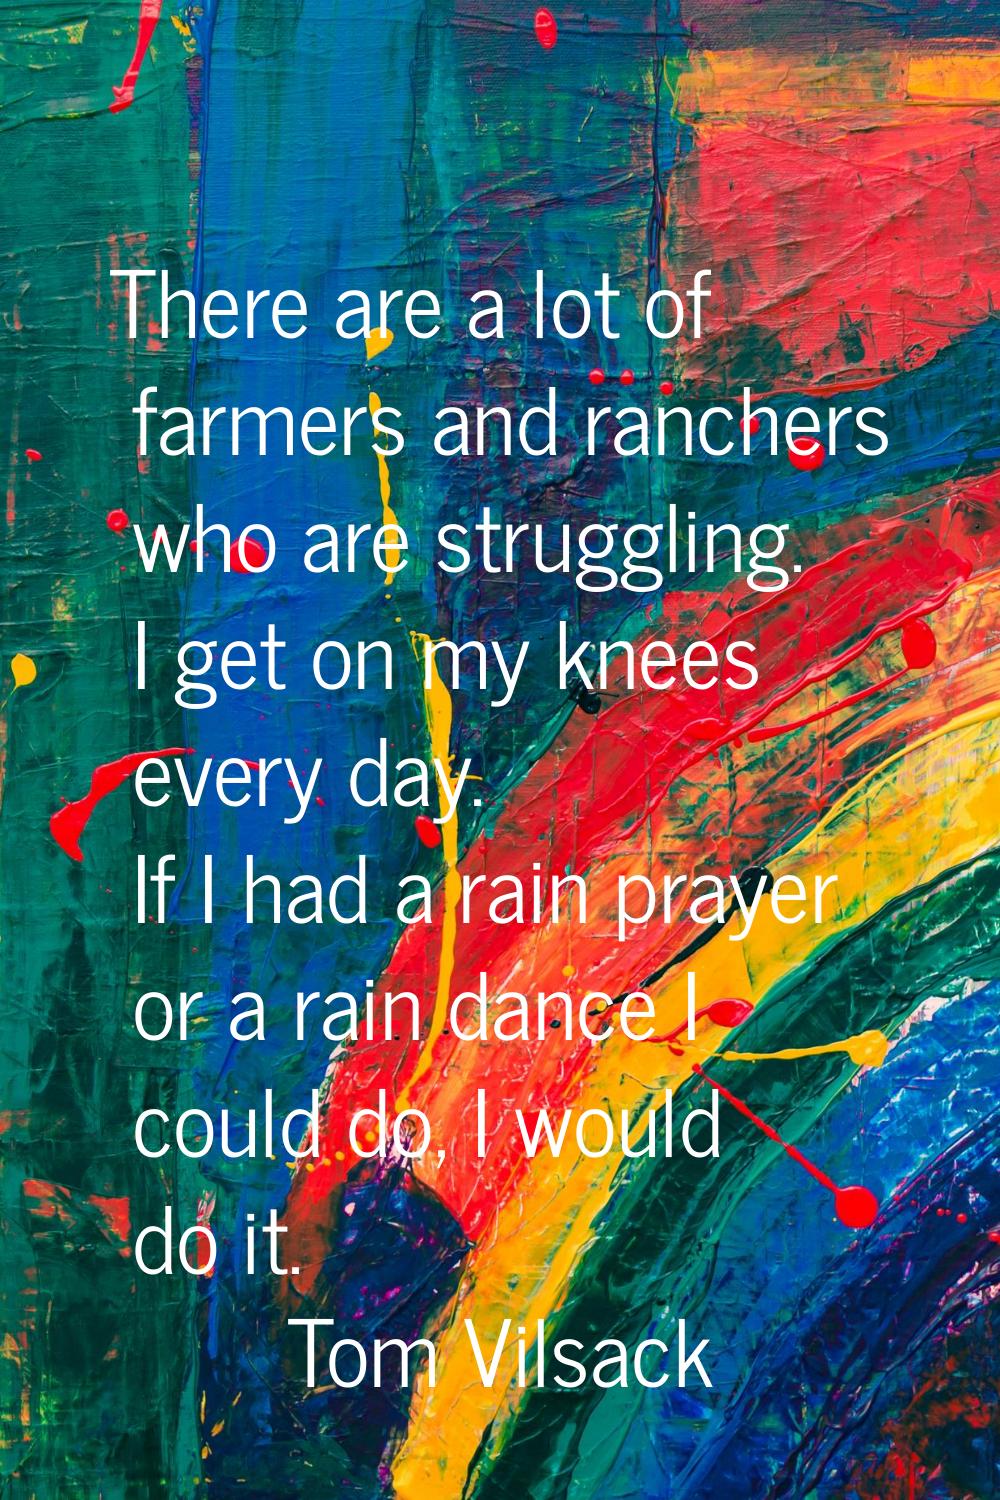 There are a lot of farmers and ranchers who are struggling. I get on my knees every day. If I had a